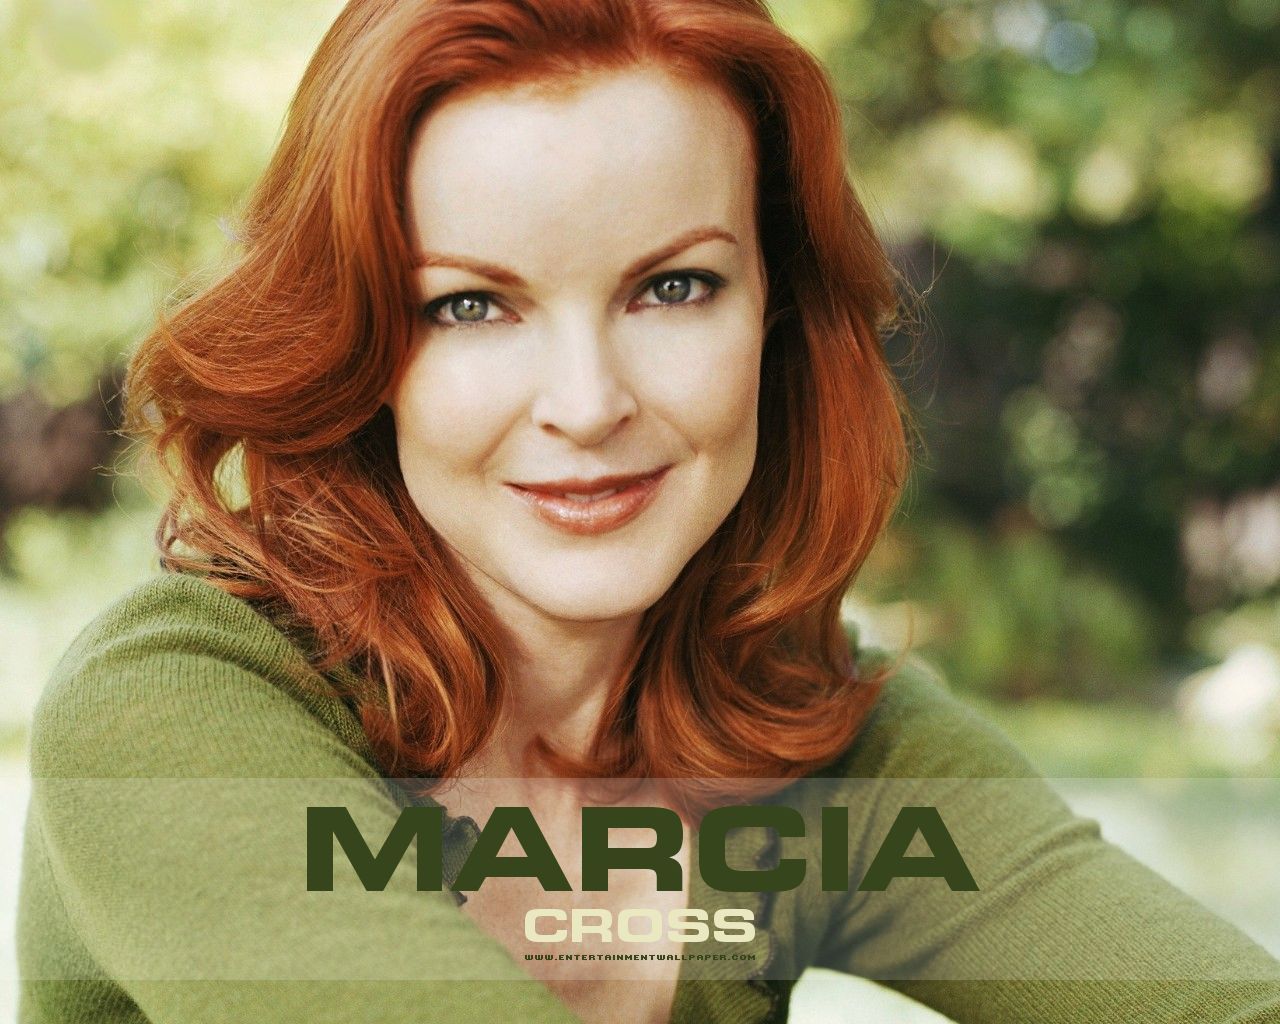 Marcia Cross - Images Gallery